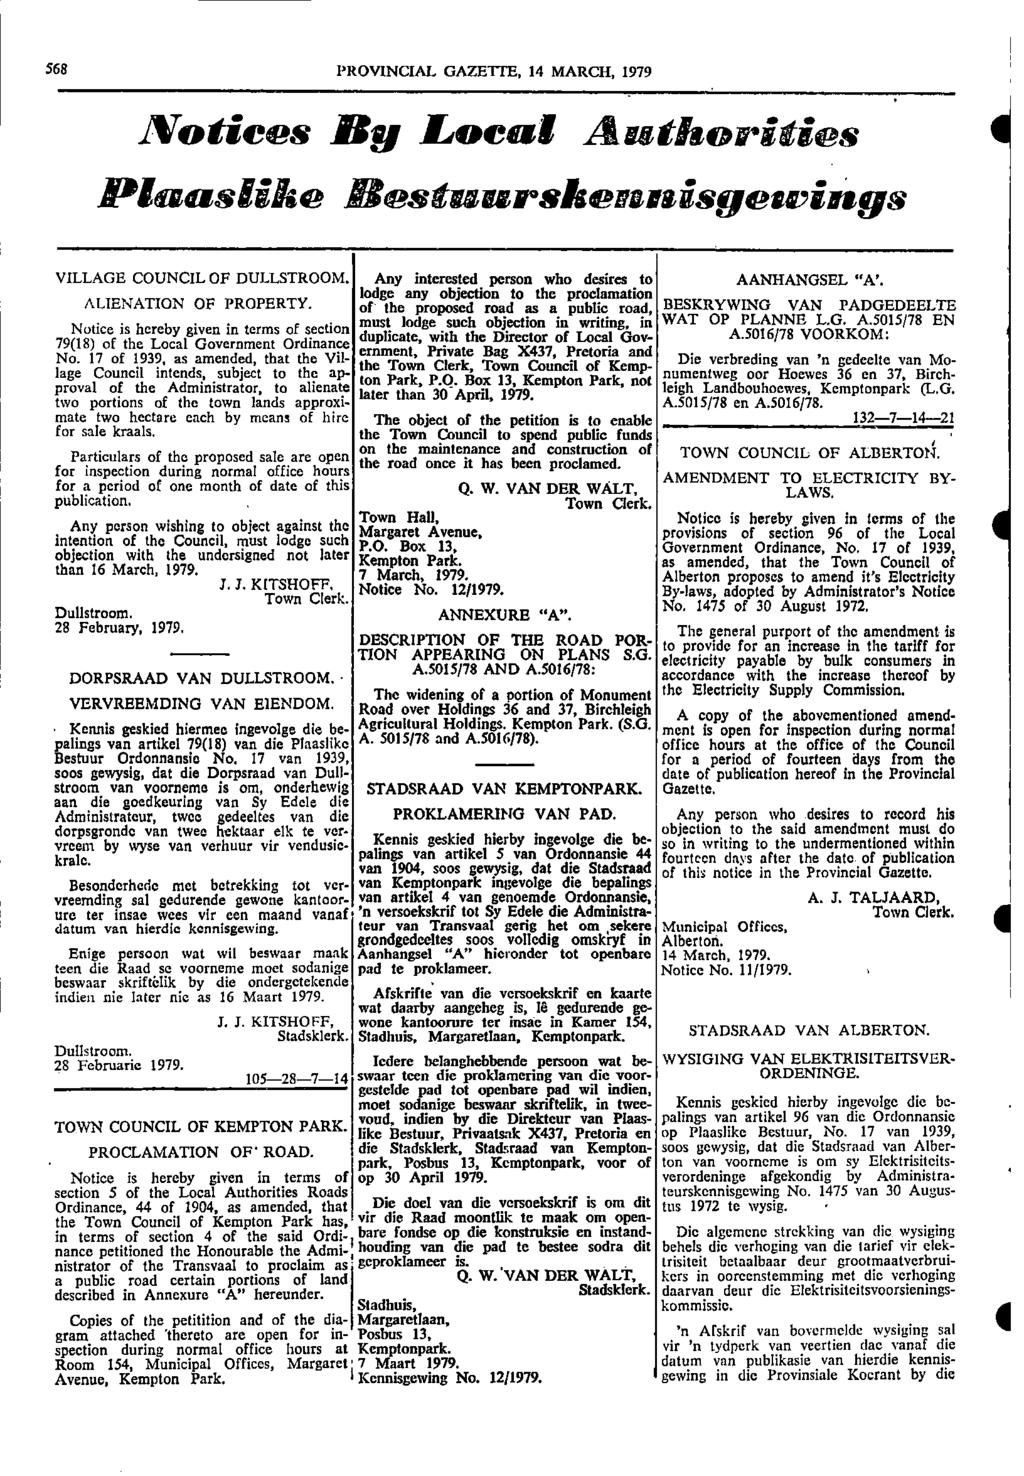 beswaar 568 PROVNCAL GAZETTE 4 MARCH 979 Notices By Local Authorities Planslike Bestuursluennisgetria gs VLLAGE COUNCL OF DULLSTROOM Any interested person who desires to AANHANGSEL "A lodge any